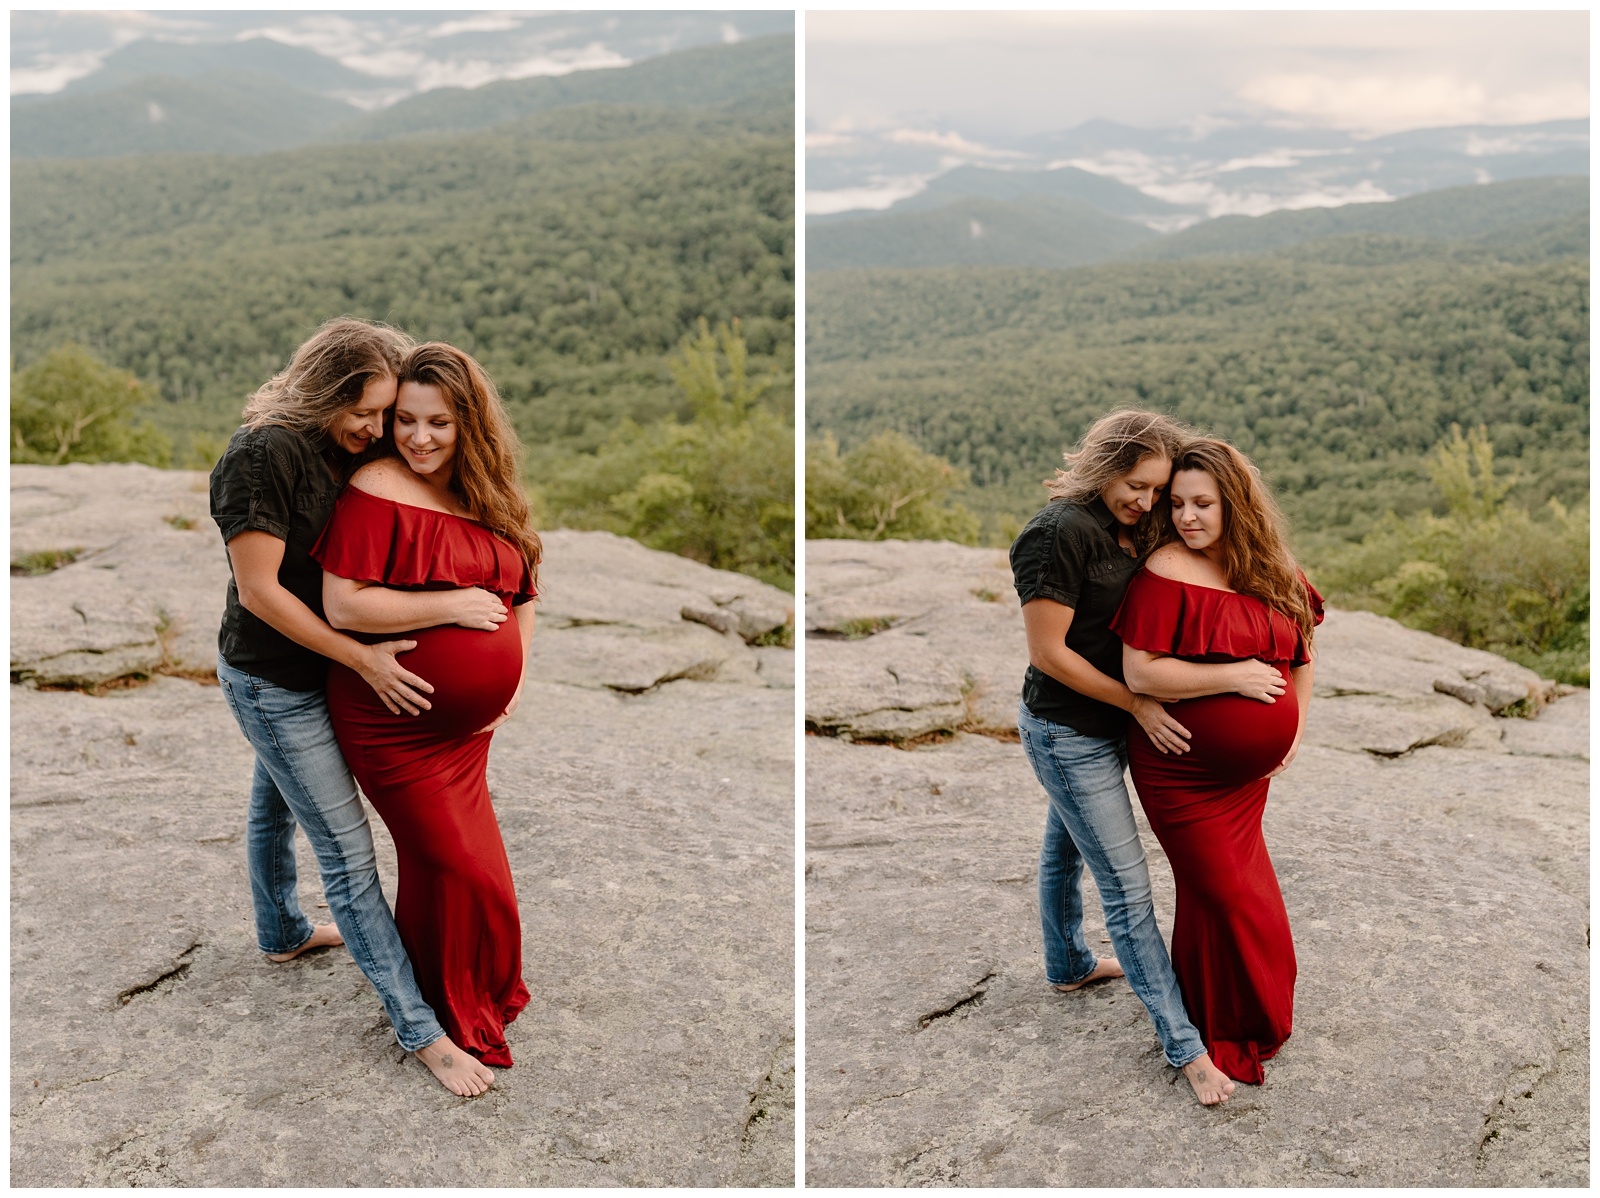 Beautiful same-sex maternity session in the mountains by North Carolina photographer